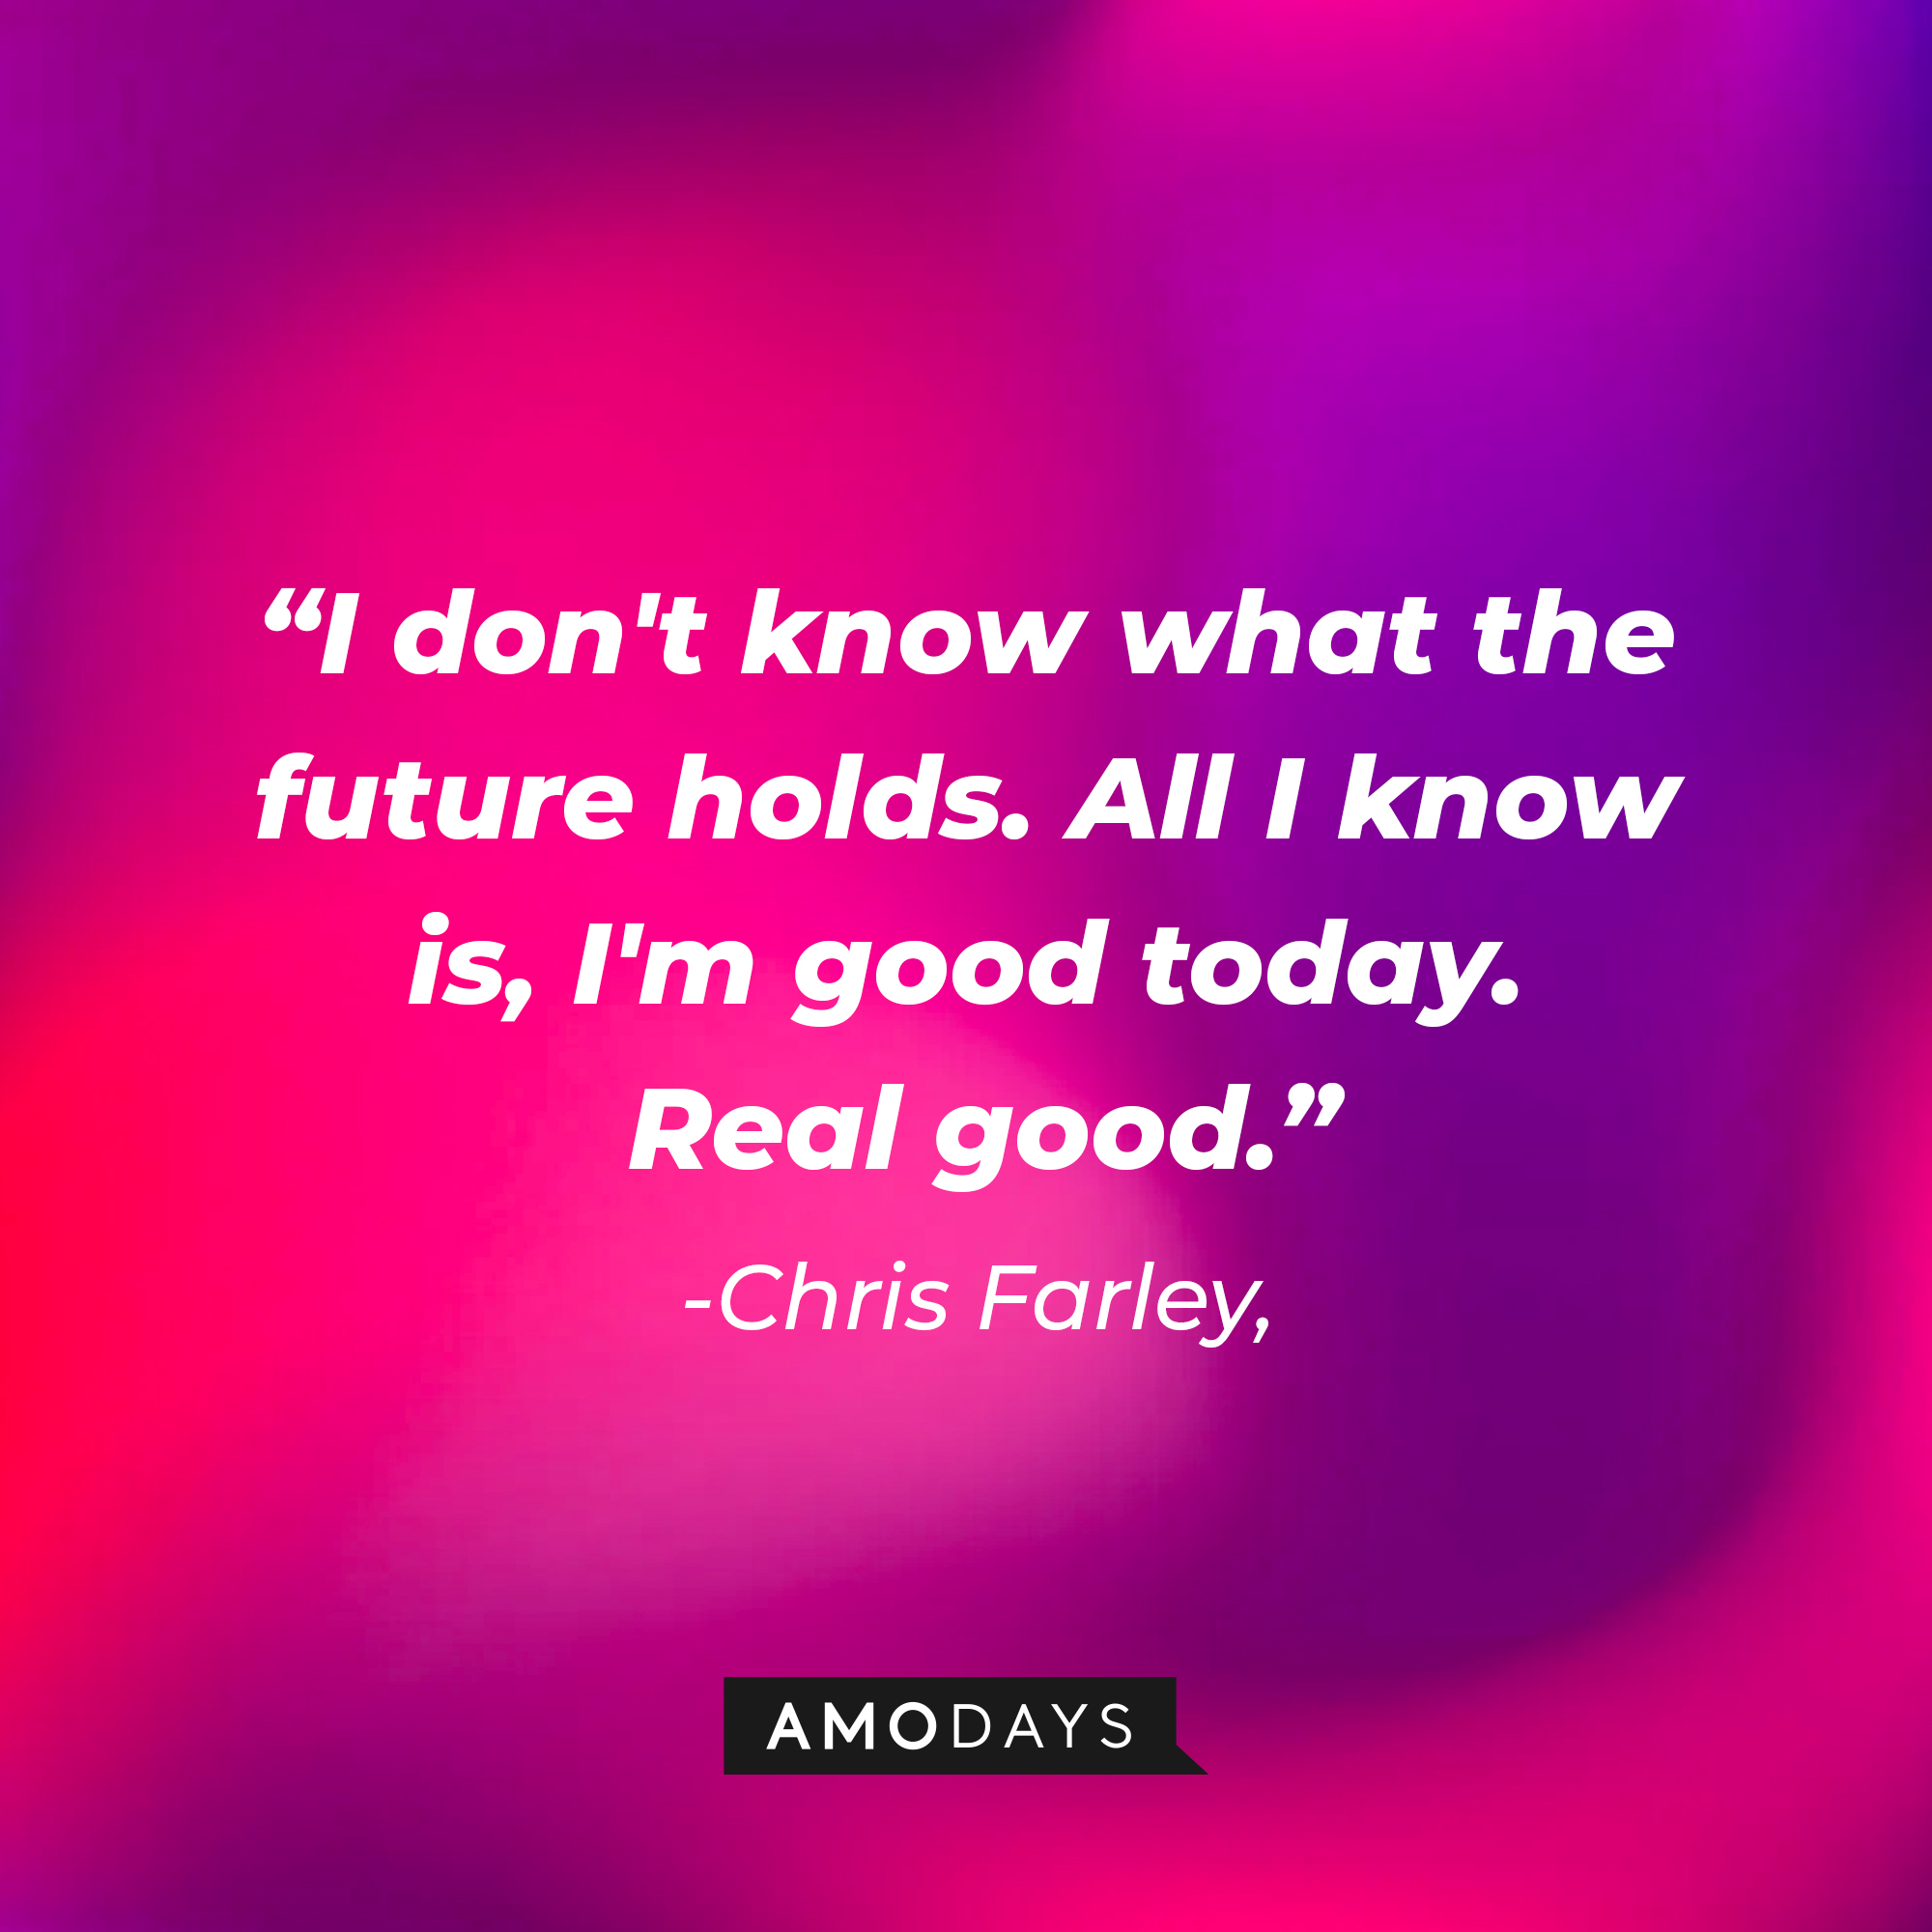 Chris Farley's quote: "I don't know what the future holds. All I know is, I'm good today. Real good." | Source: Amodays